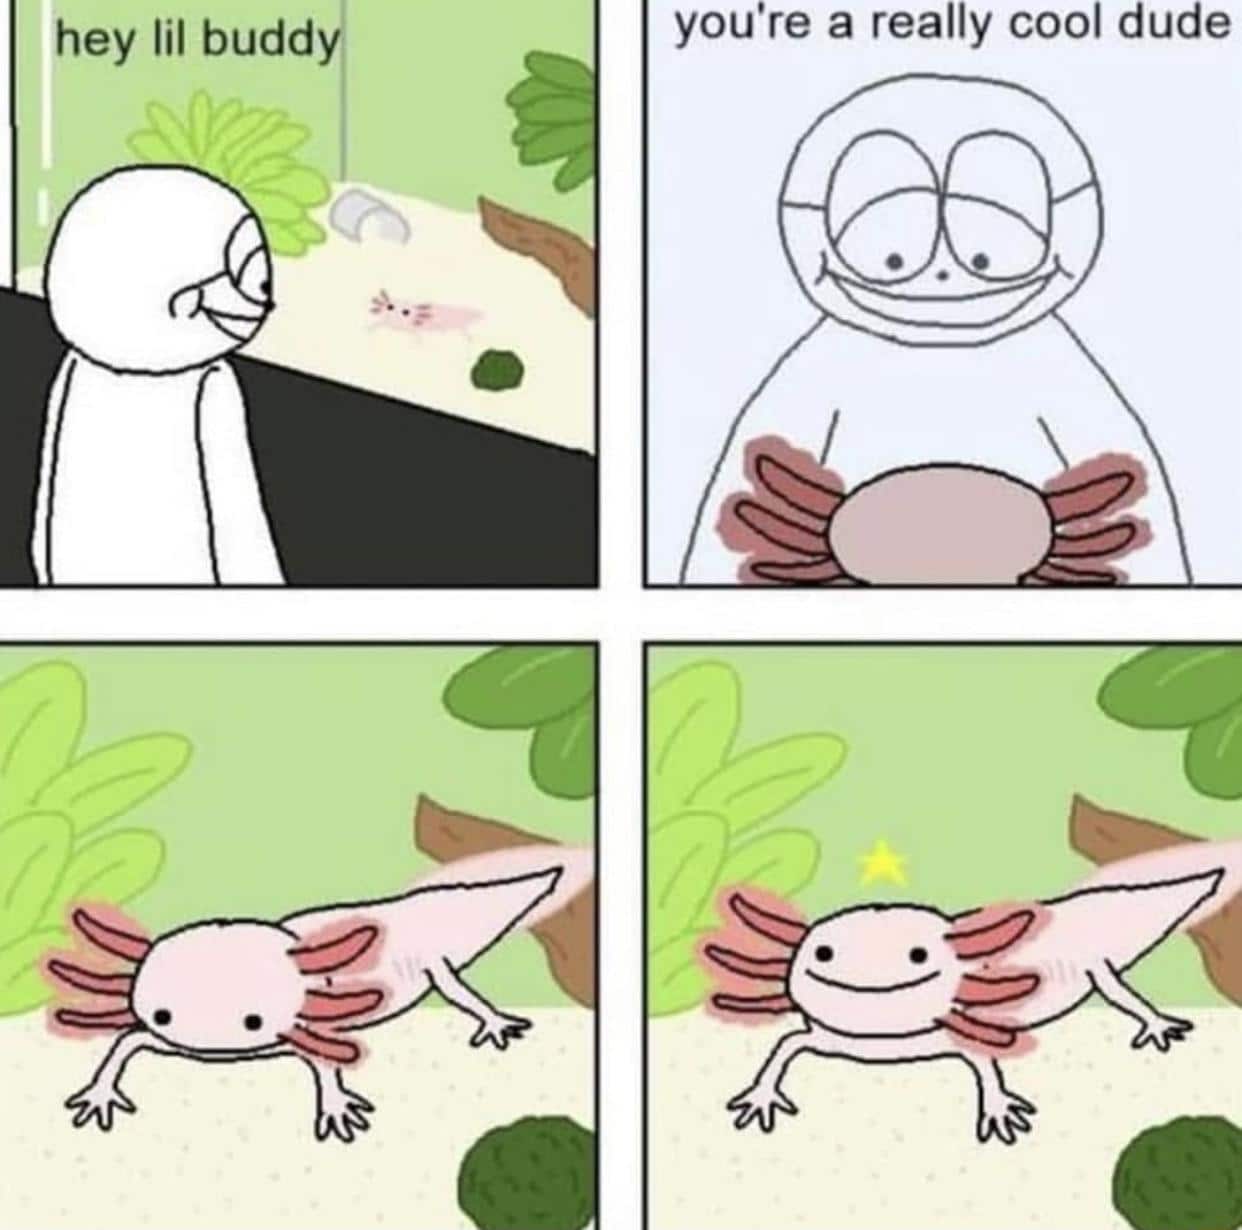 Wholesome memes, Kipper, Axolotls Wholesome Memes Wholesome memes, Kipper, Axolotls text: hey lil buddi you're a really cool dude 